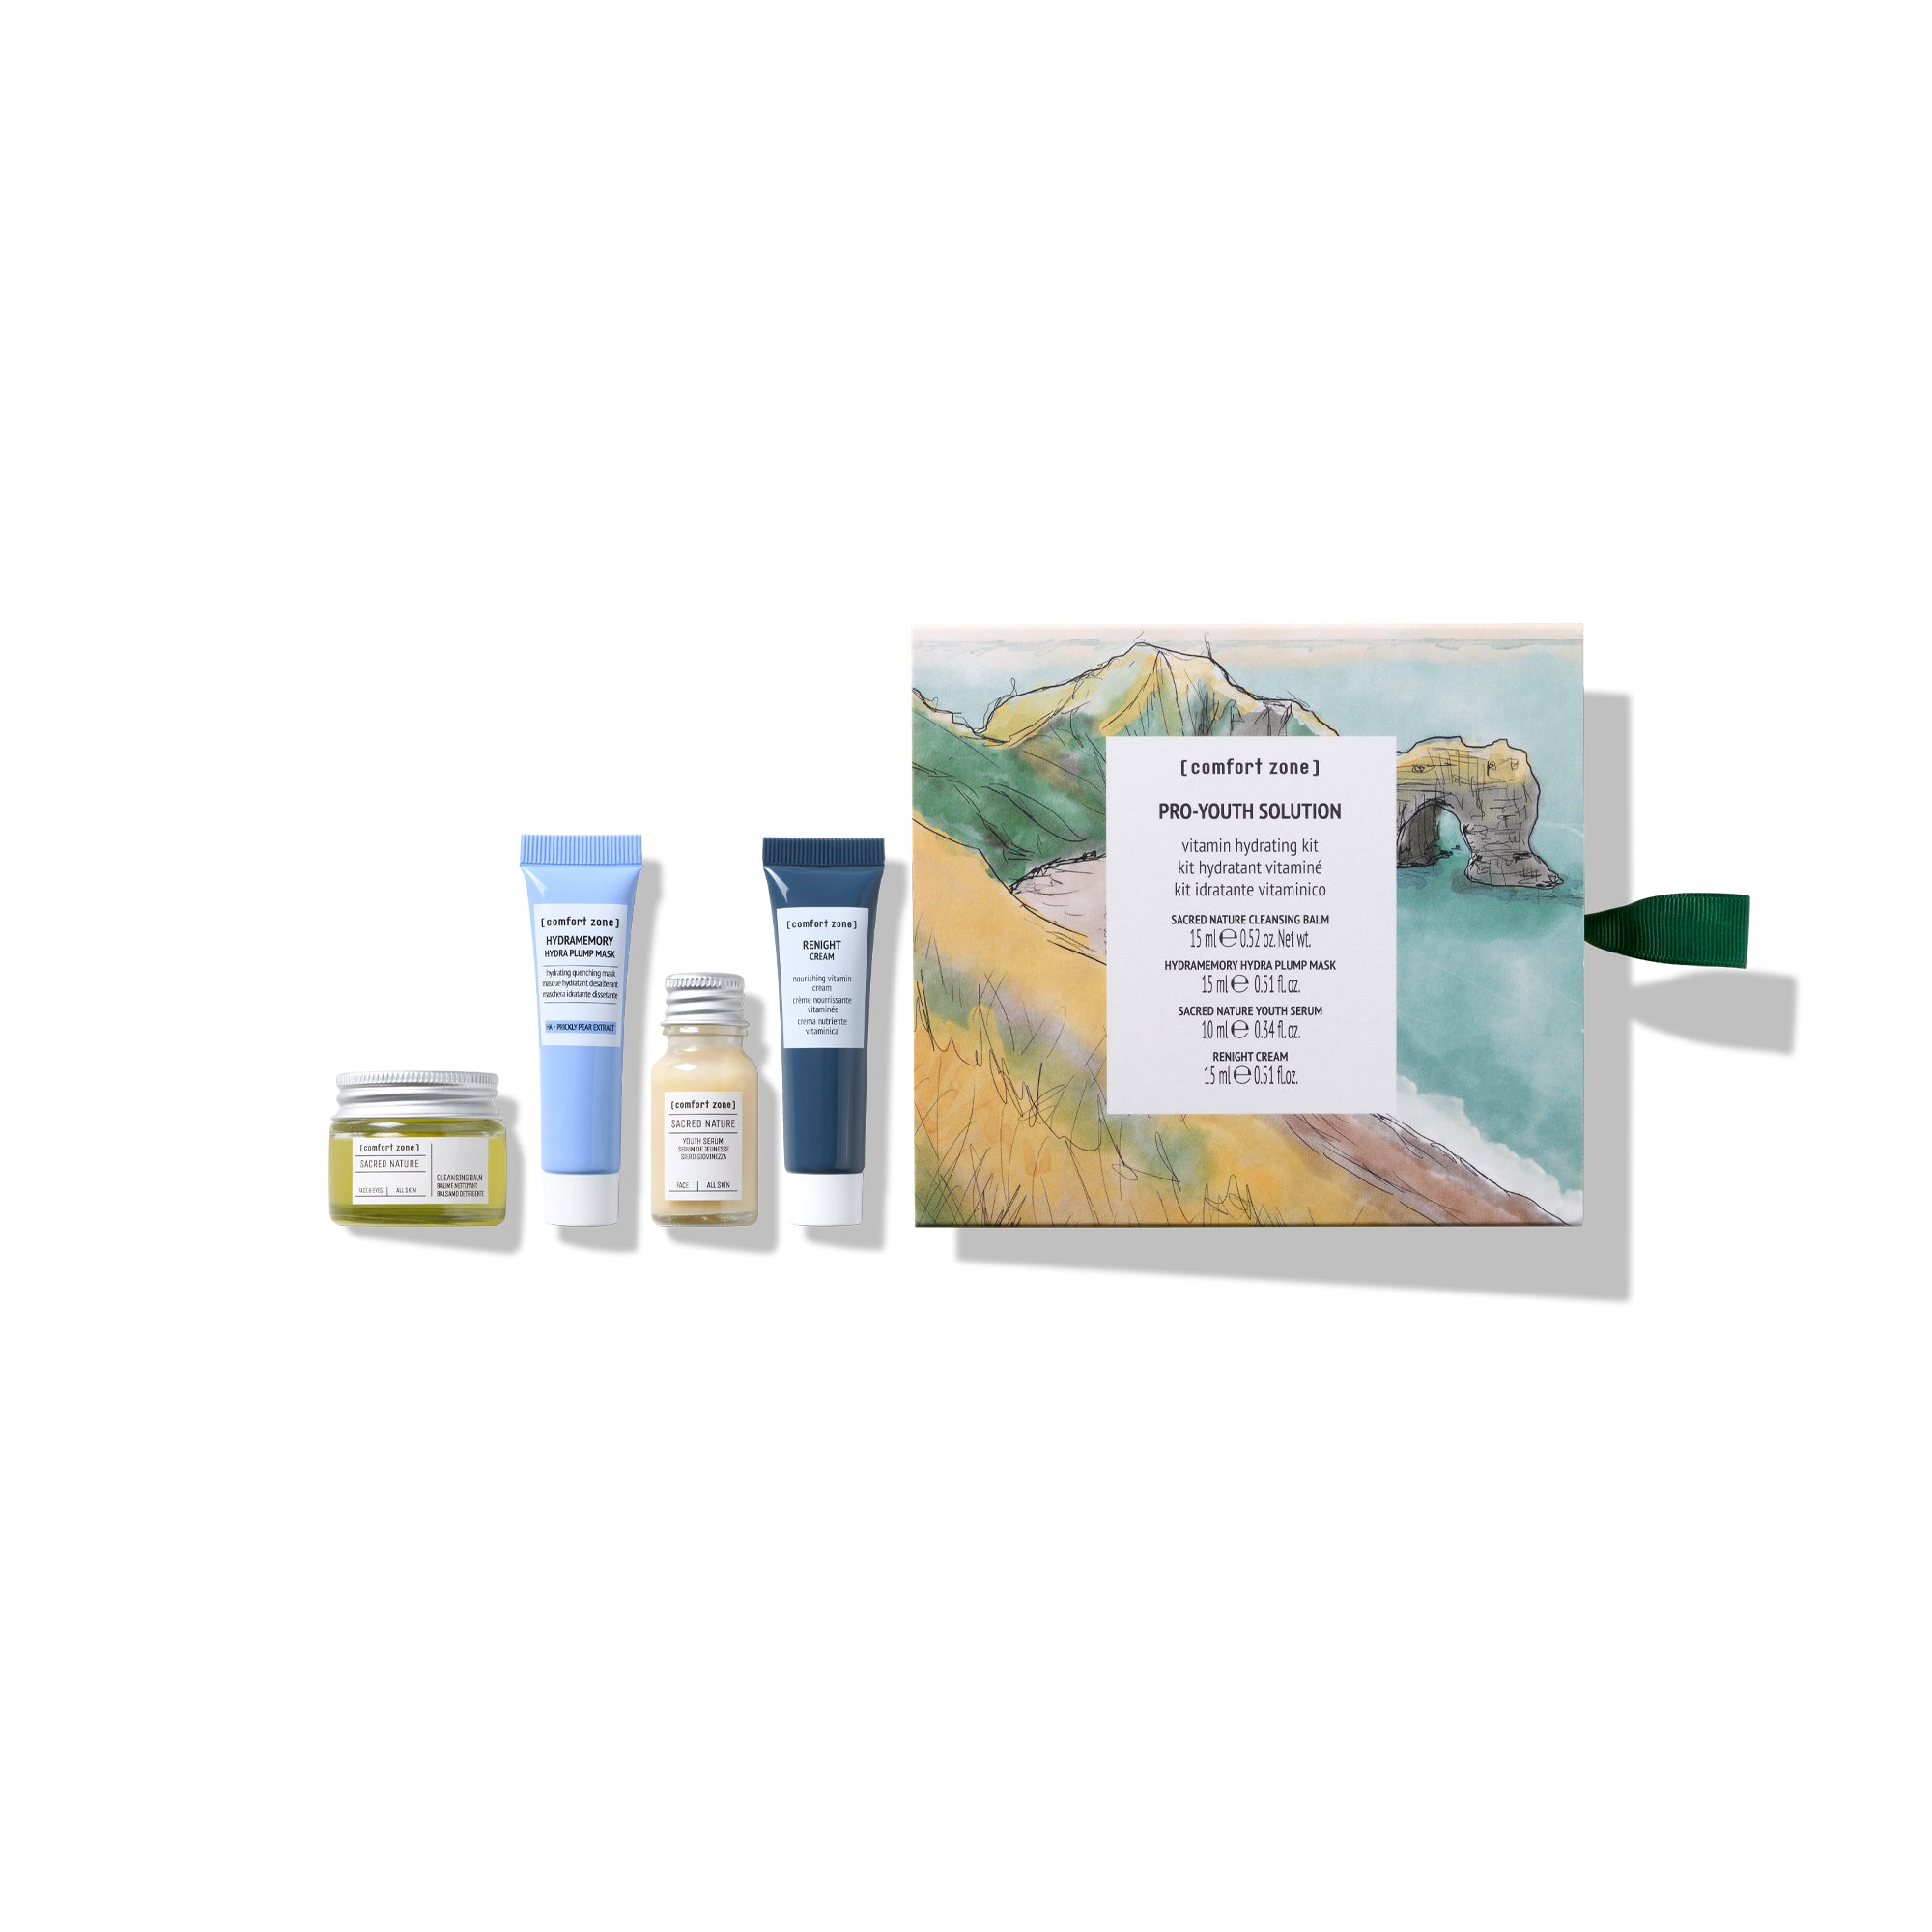 Comfort Zone: KIT PRO-YOUTH SOLUTION Hydrating travel kit-
